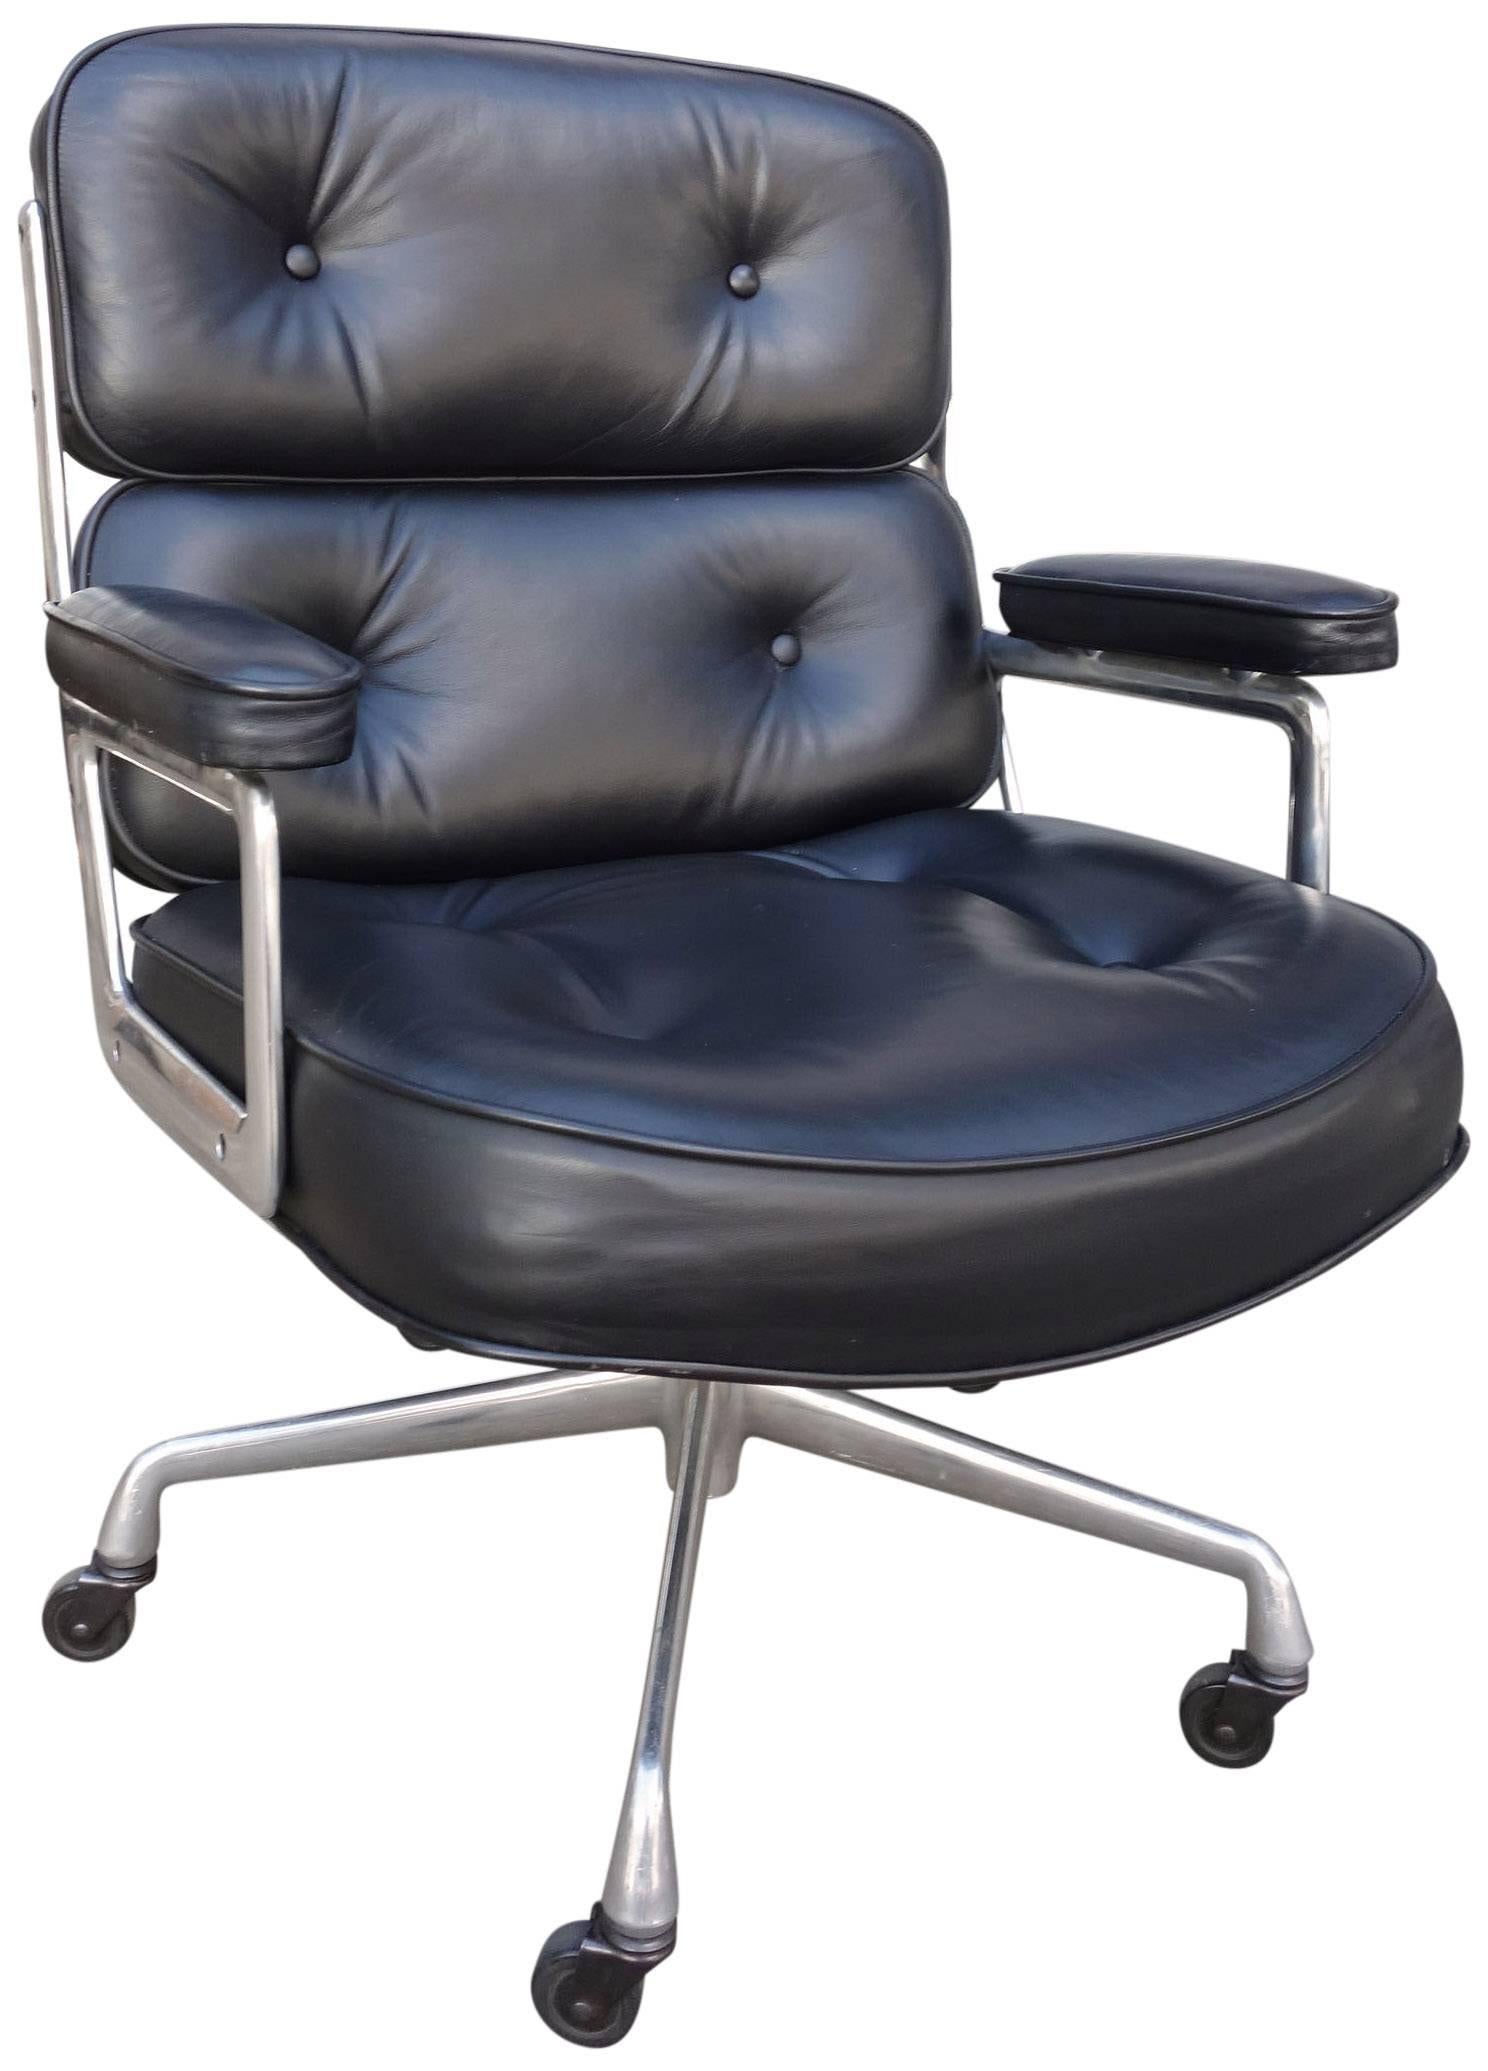 Eames designed chairs for New York's Time-Life Building in the late 1950s. These examples are from the late 1990s. Different then the aluminum group / soft pad chairs, this chair is the most luxurious executive chair available. The top grade black